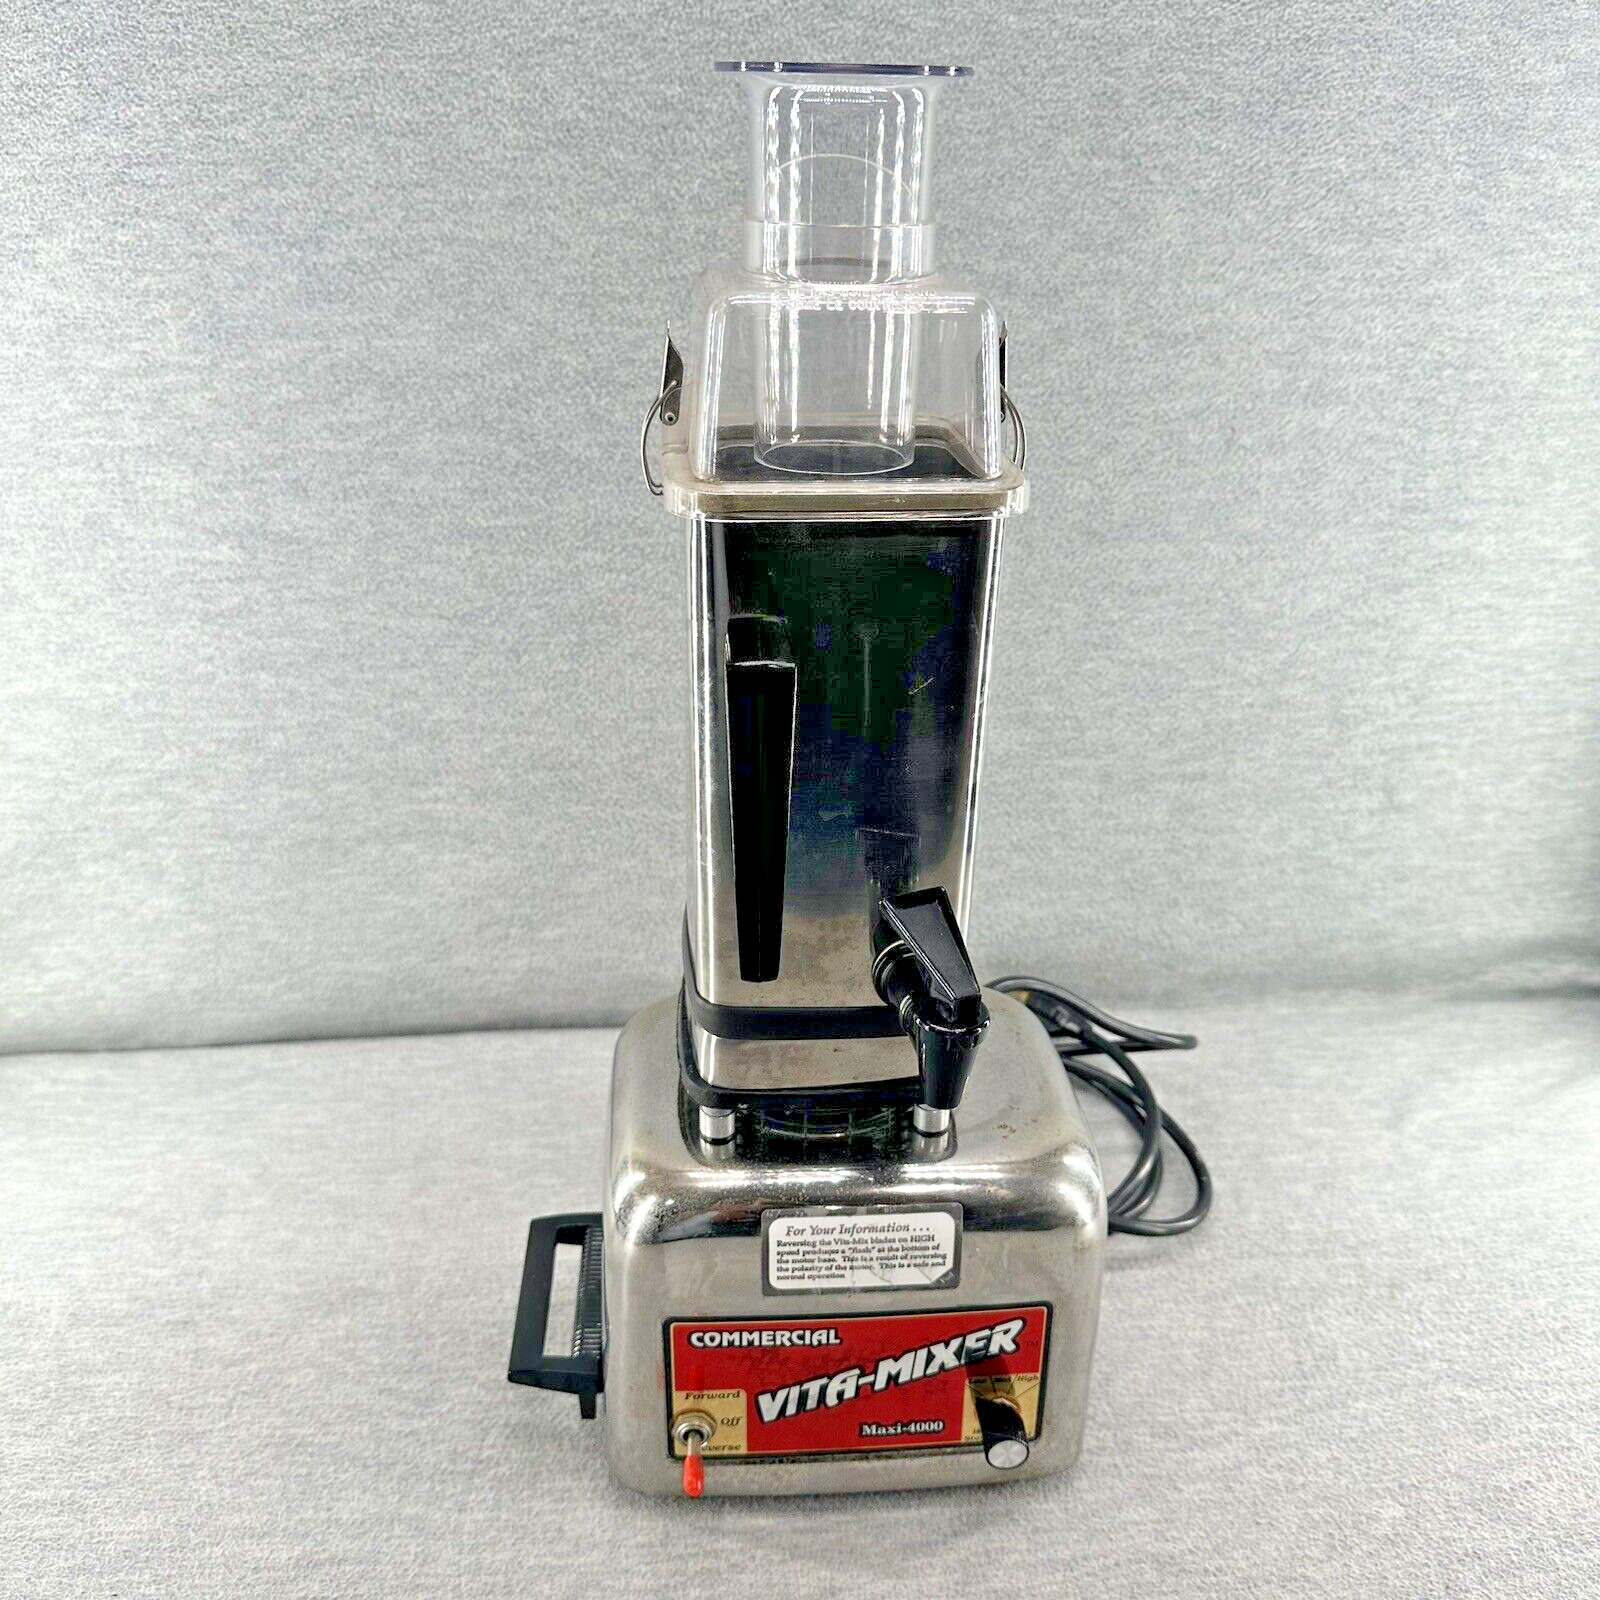 COMMERCIAL VITA-MIXER- Maxi-4000 Blender 850 Watts Stainless - NO Plunger